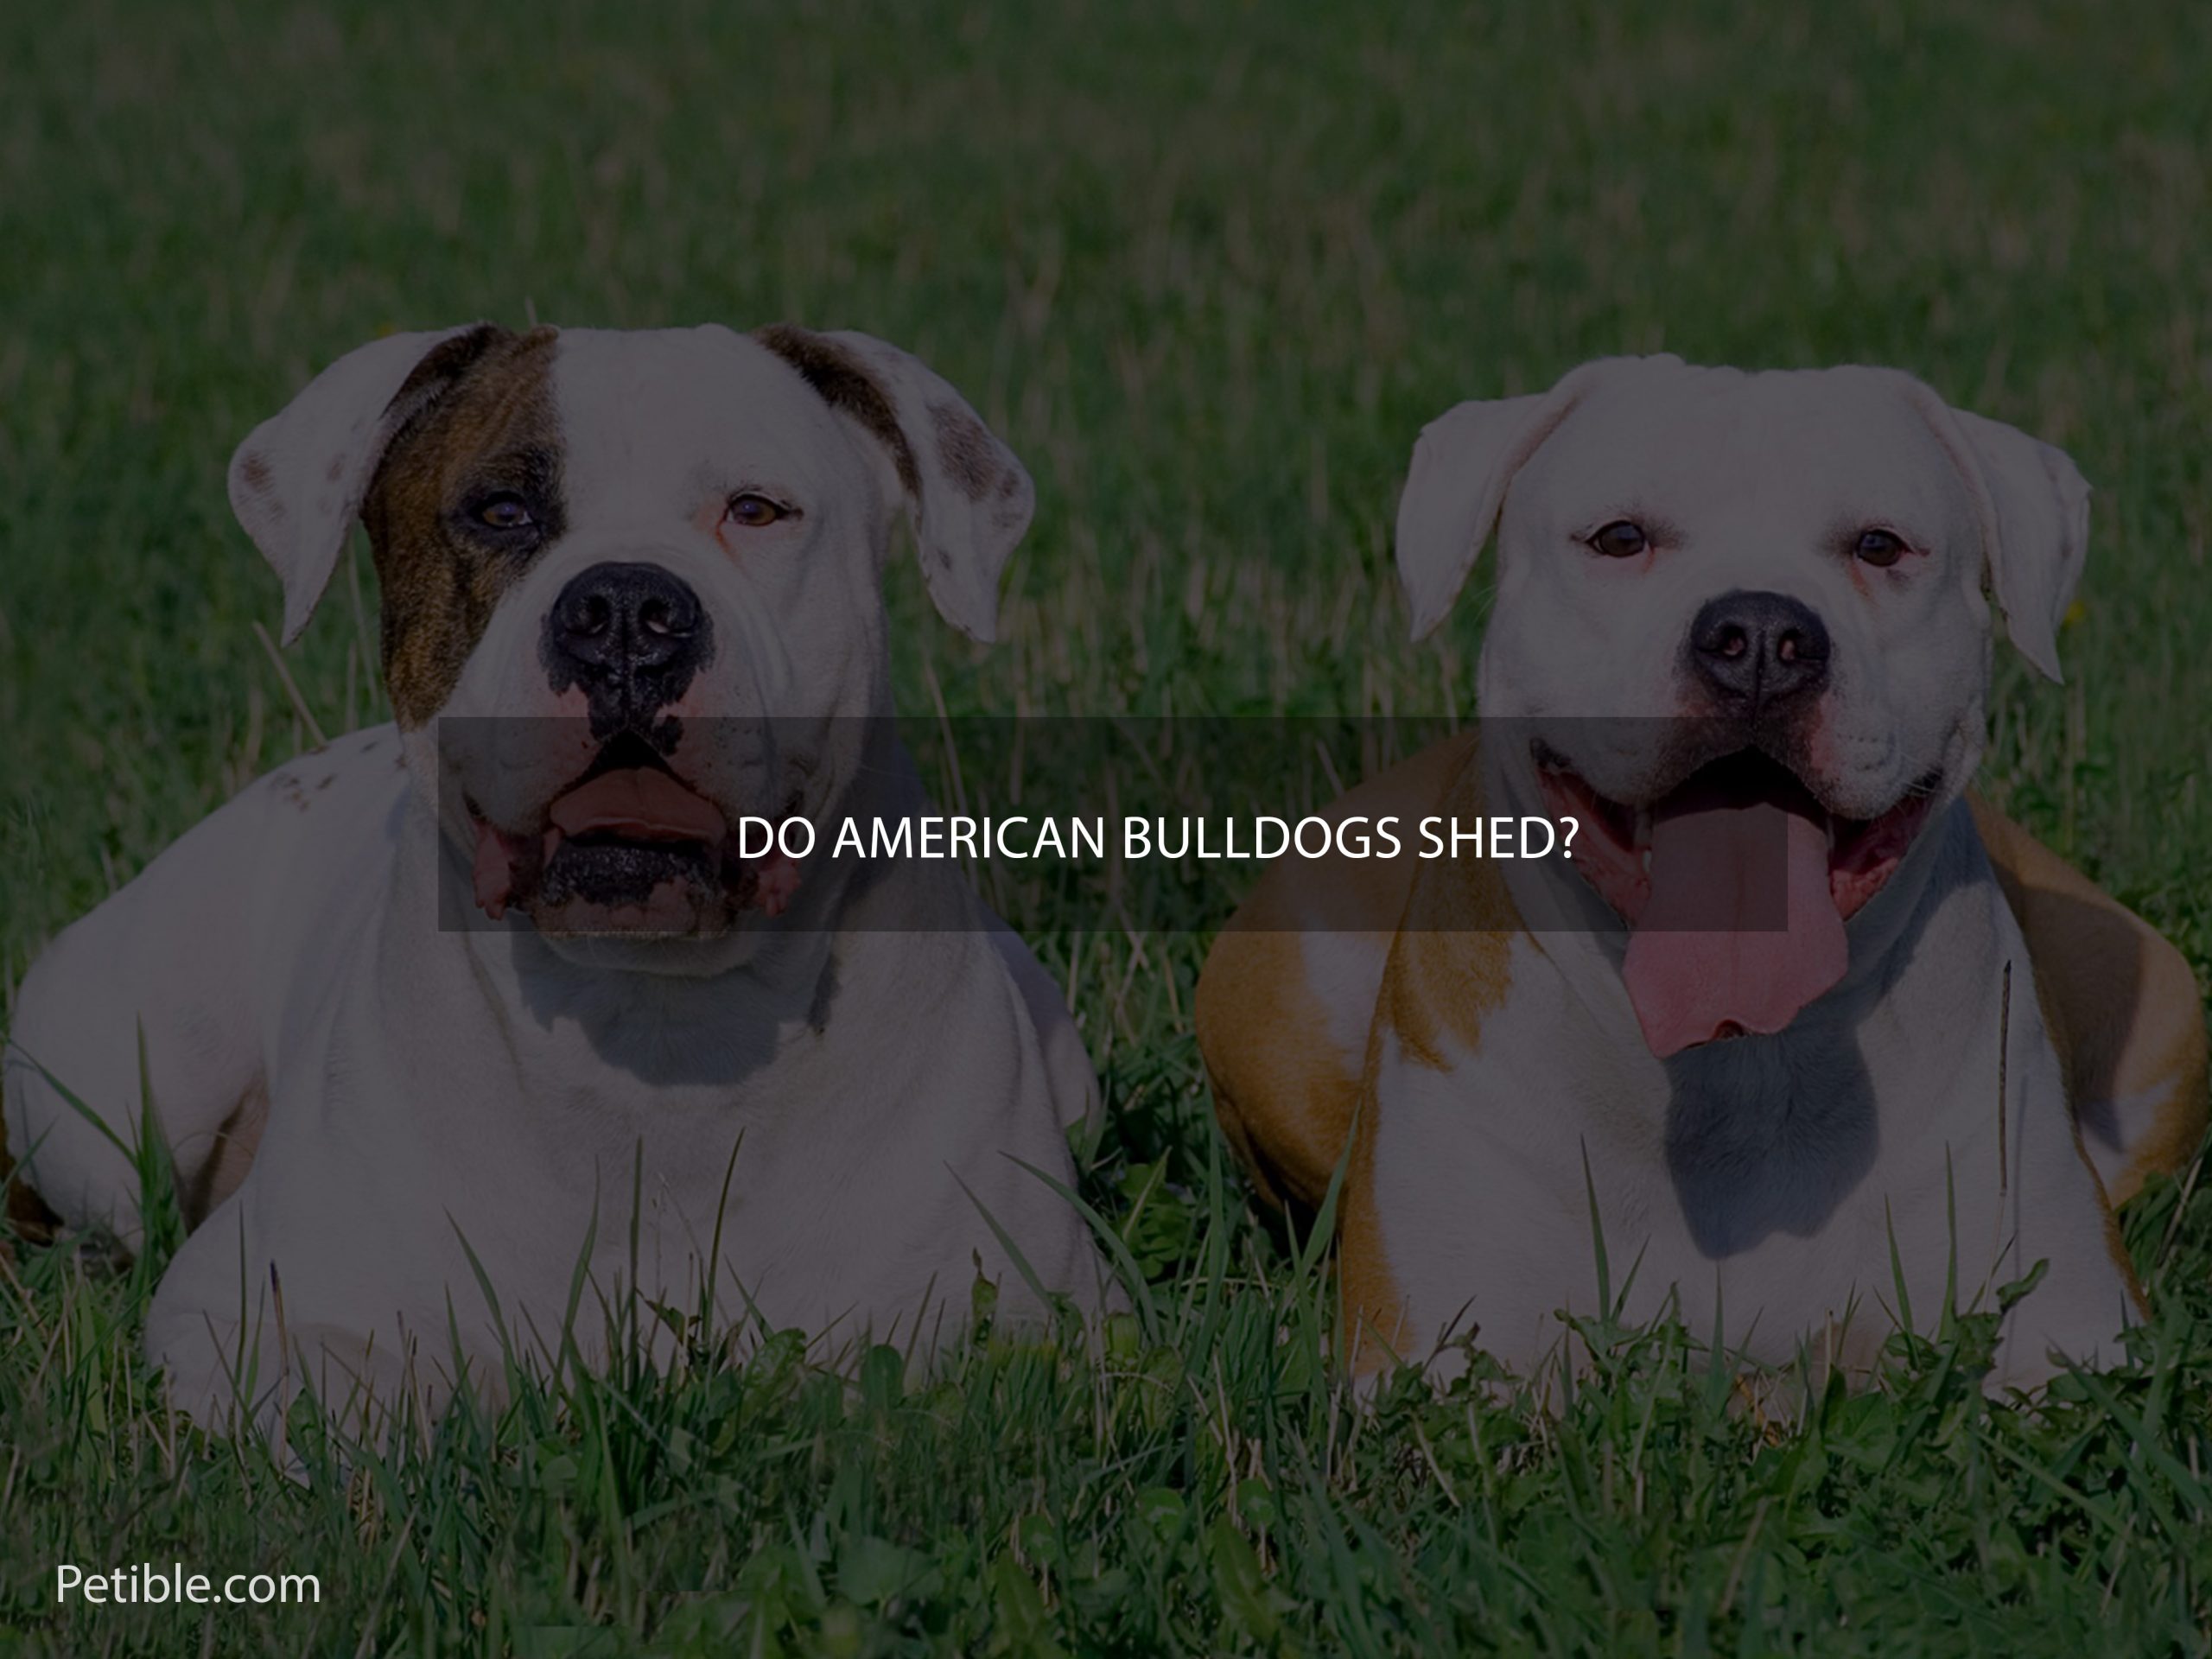 Do American Bulldogs shed?